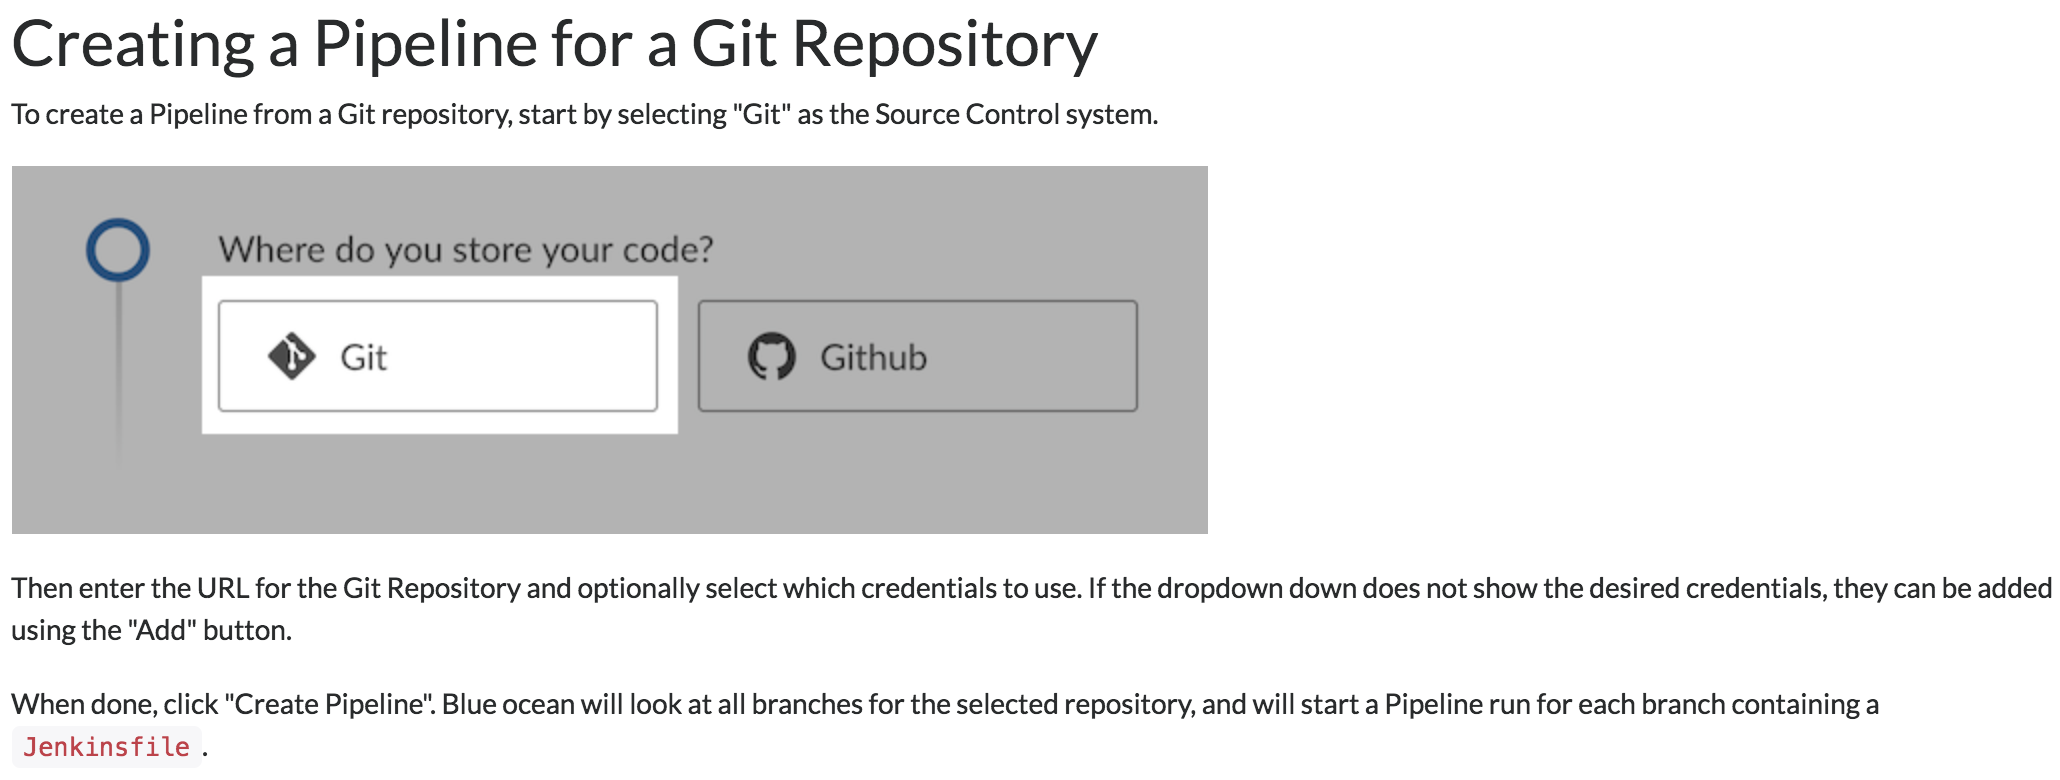 Creating a Pipeline for a Git Repository